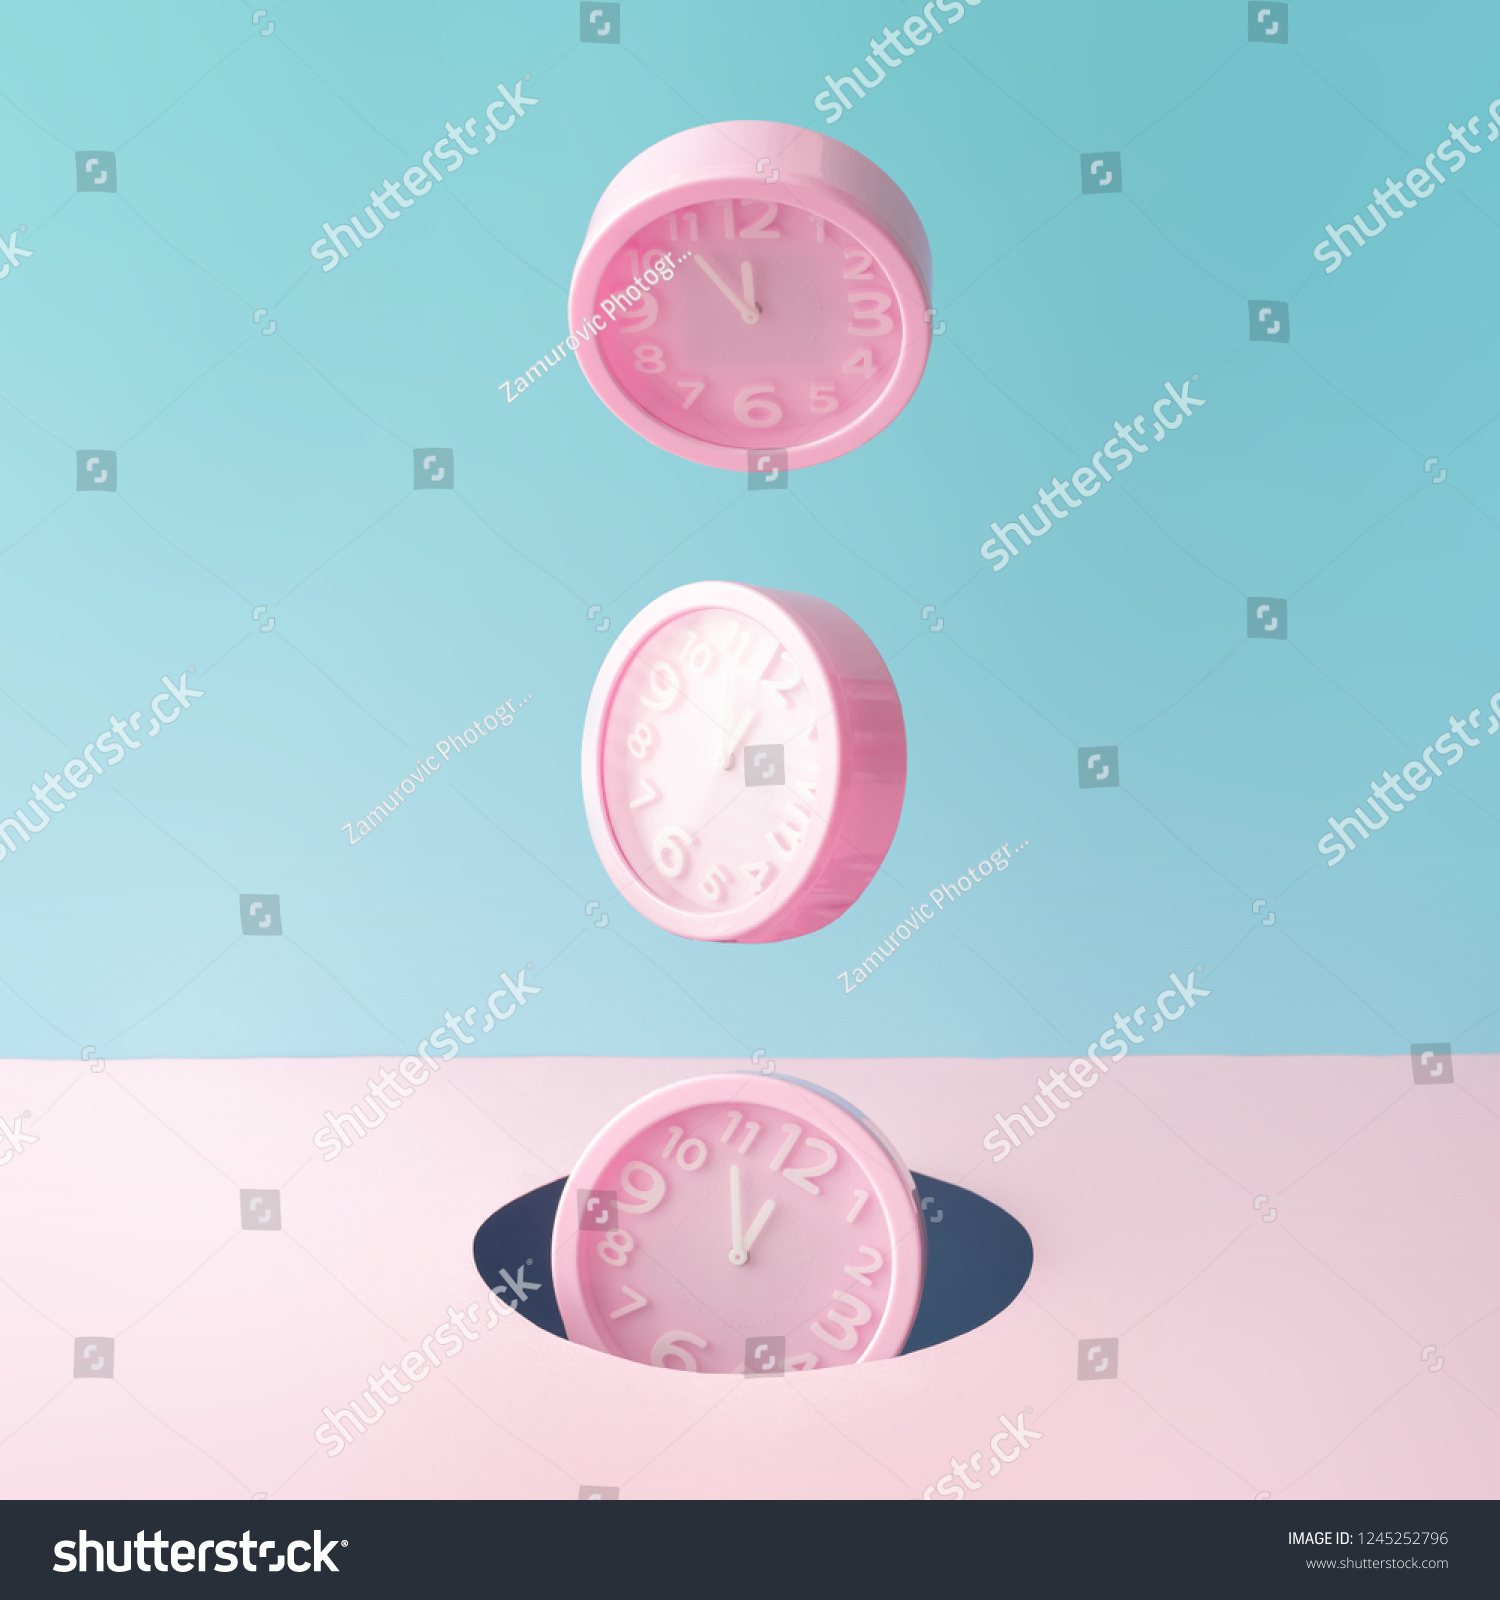 Pastel pink wall clocks on blue backdrop falling down. Time concept. Minimal composition. #1245252796